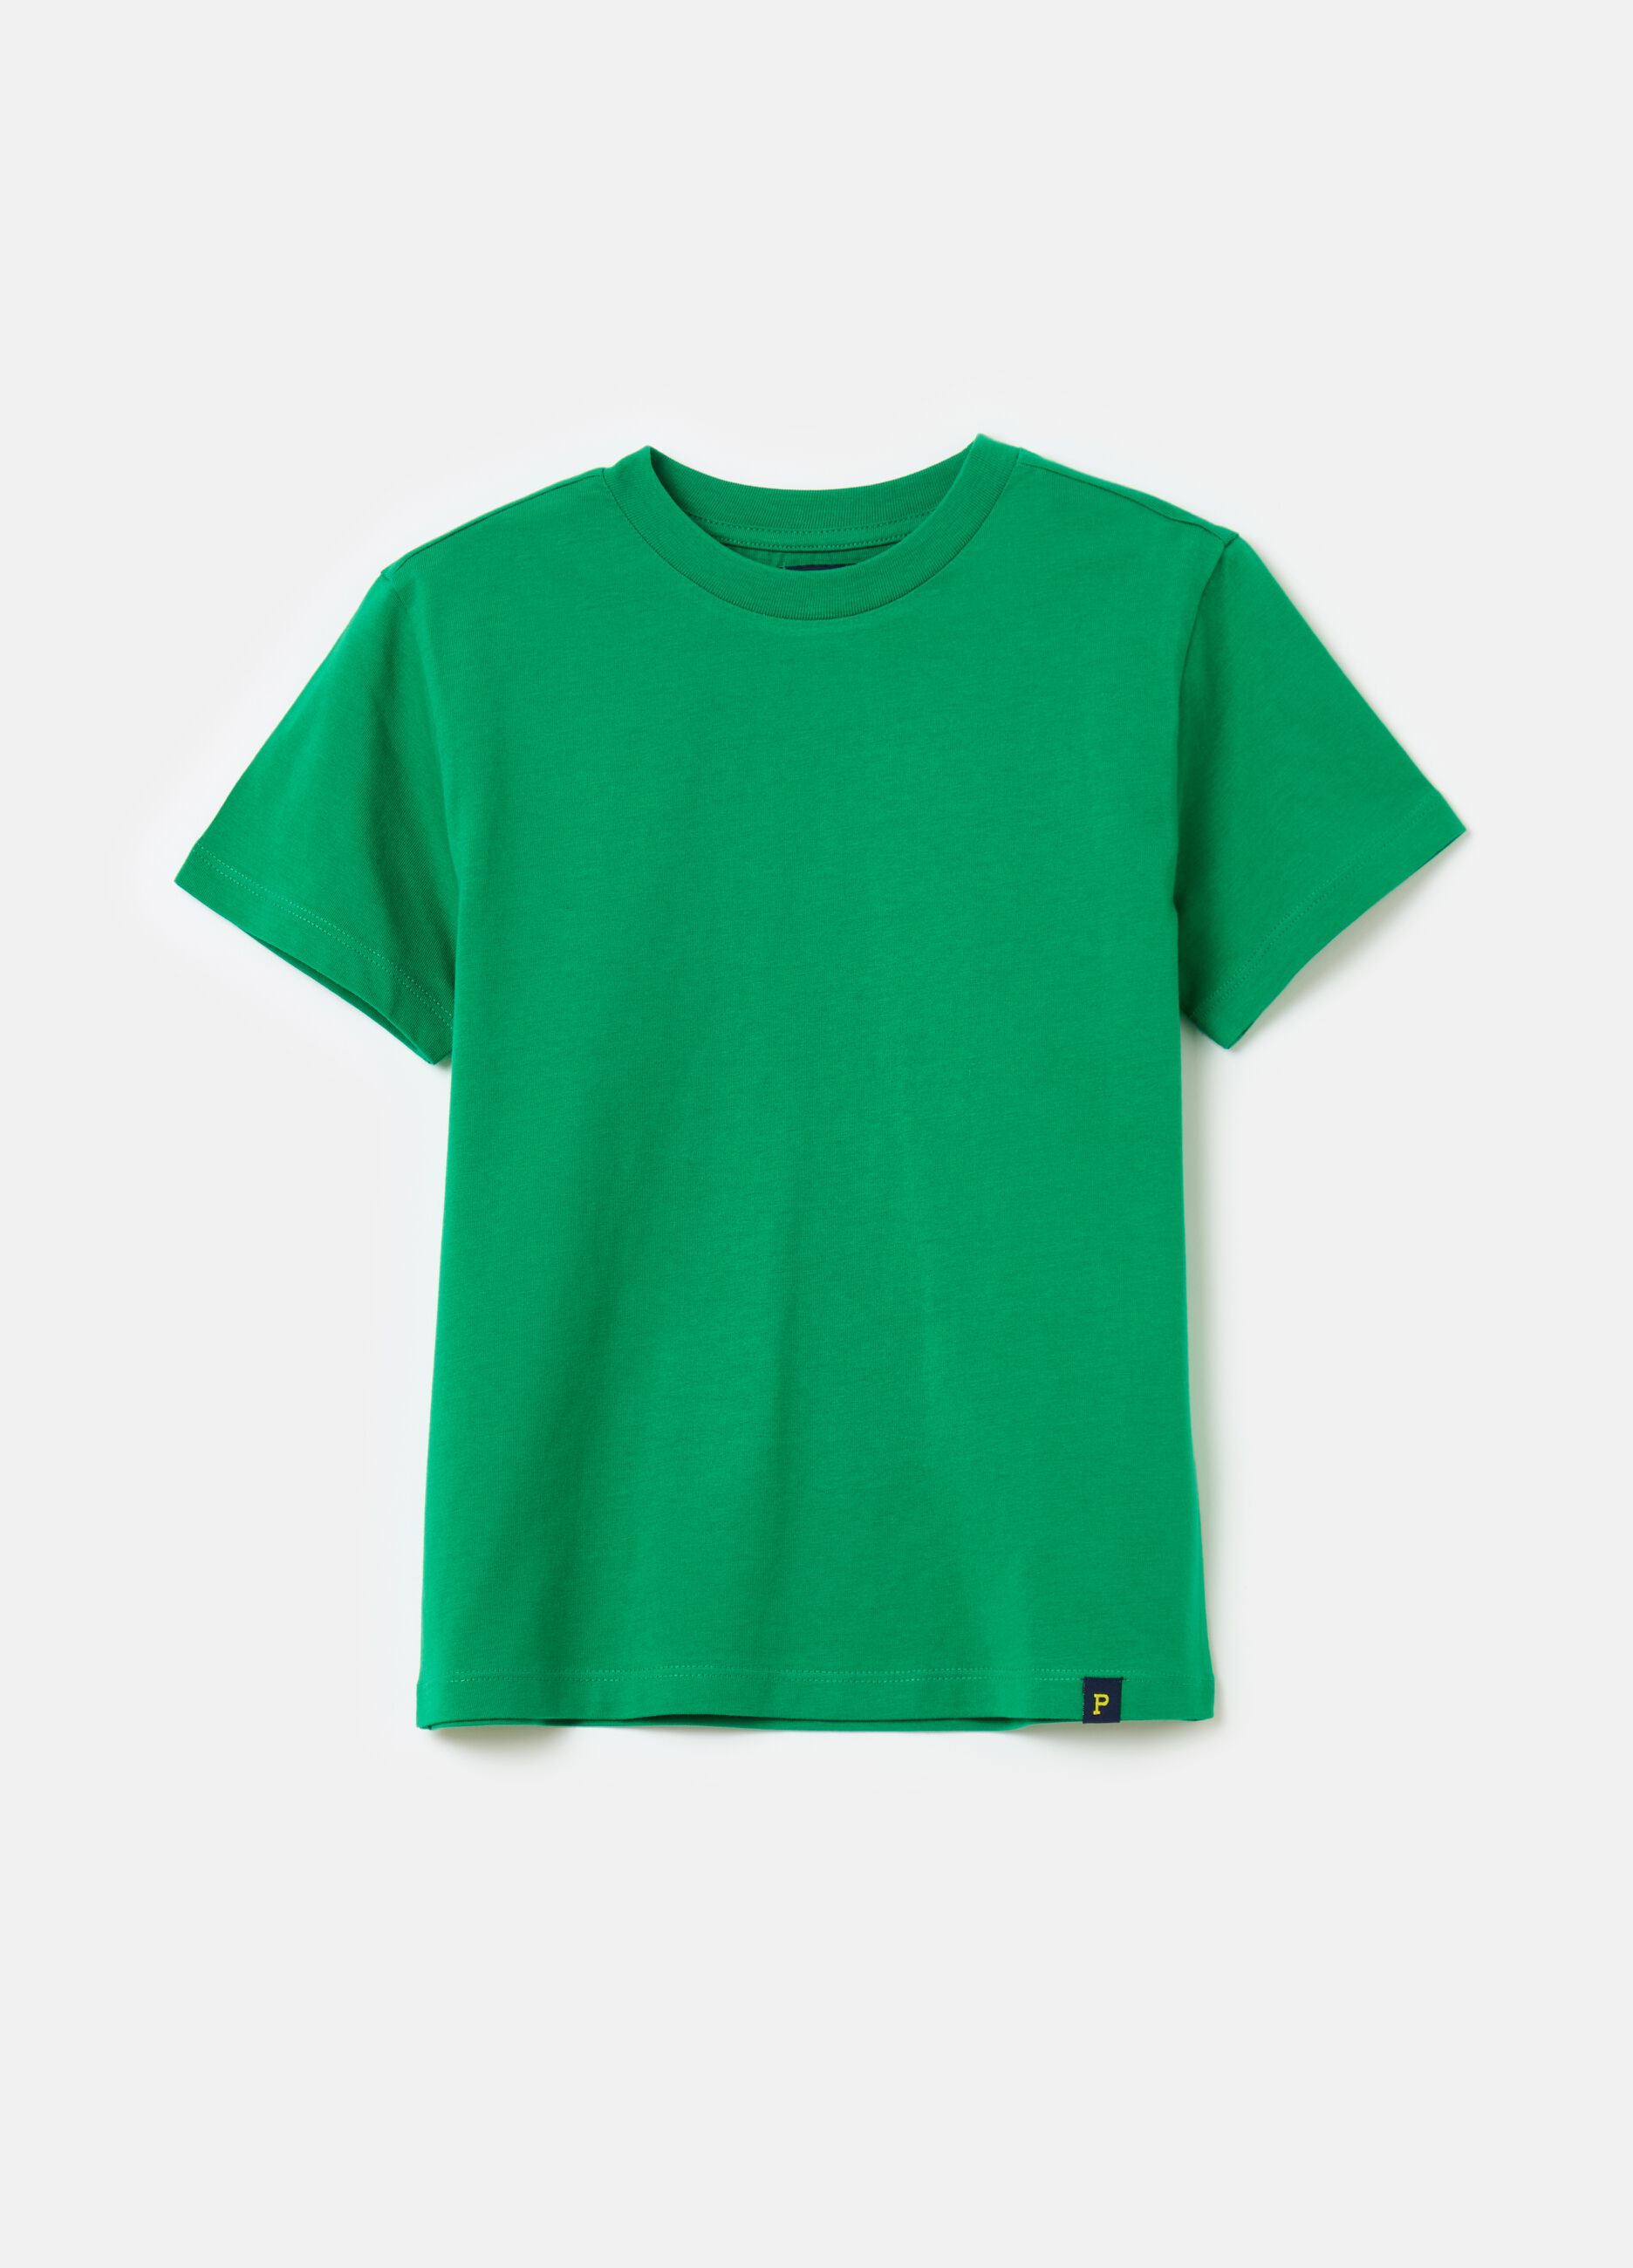 Cotton T-shirt with round neck